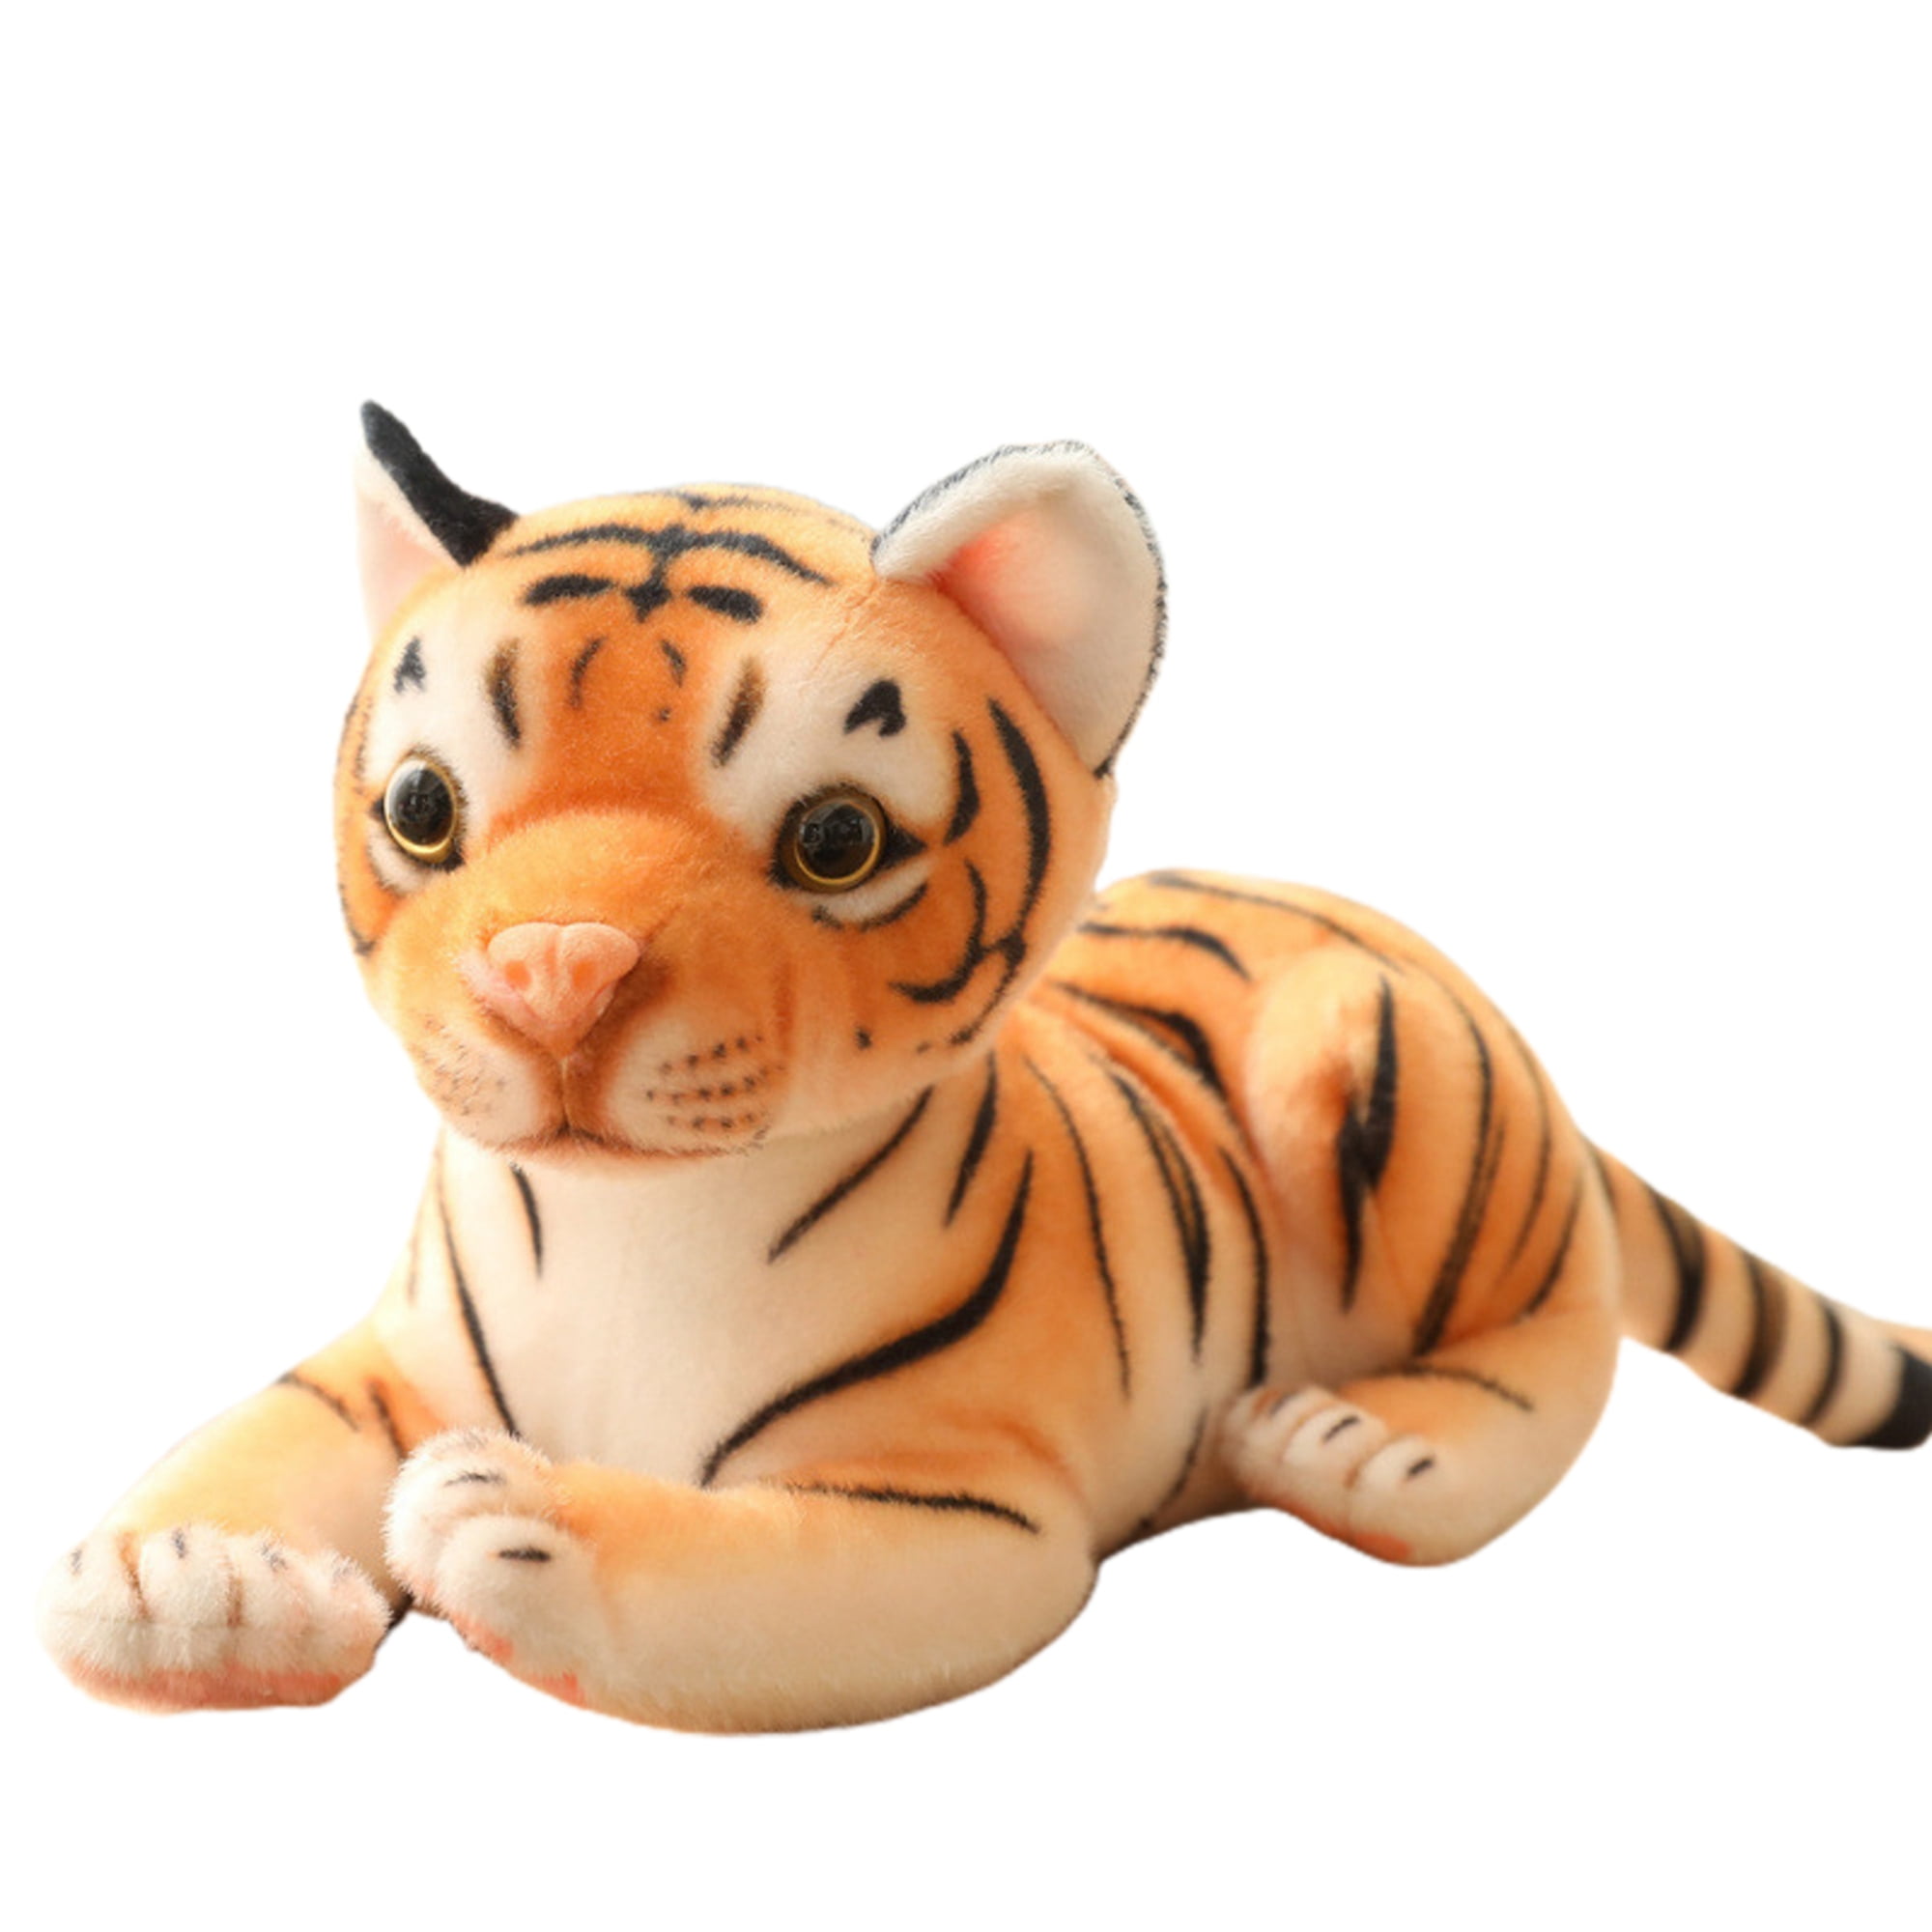 Realistic White Brown Tiger Stuffed Animal Plush Soft Doll Toy Kids Pillows Toy 